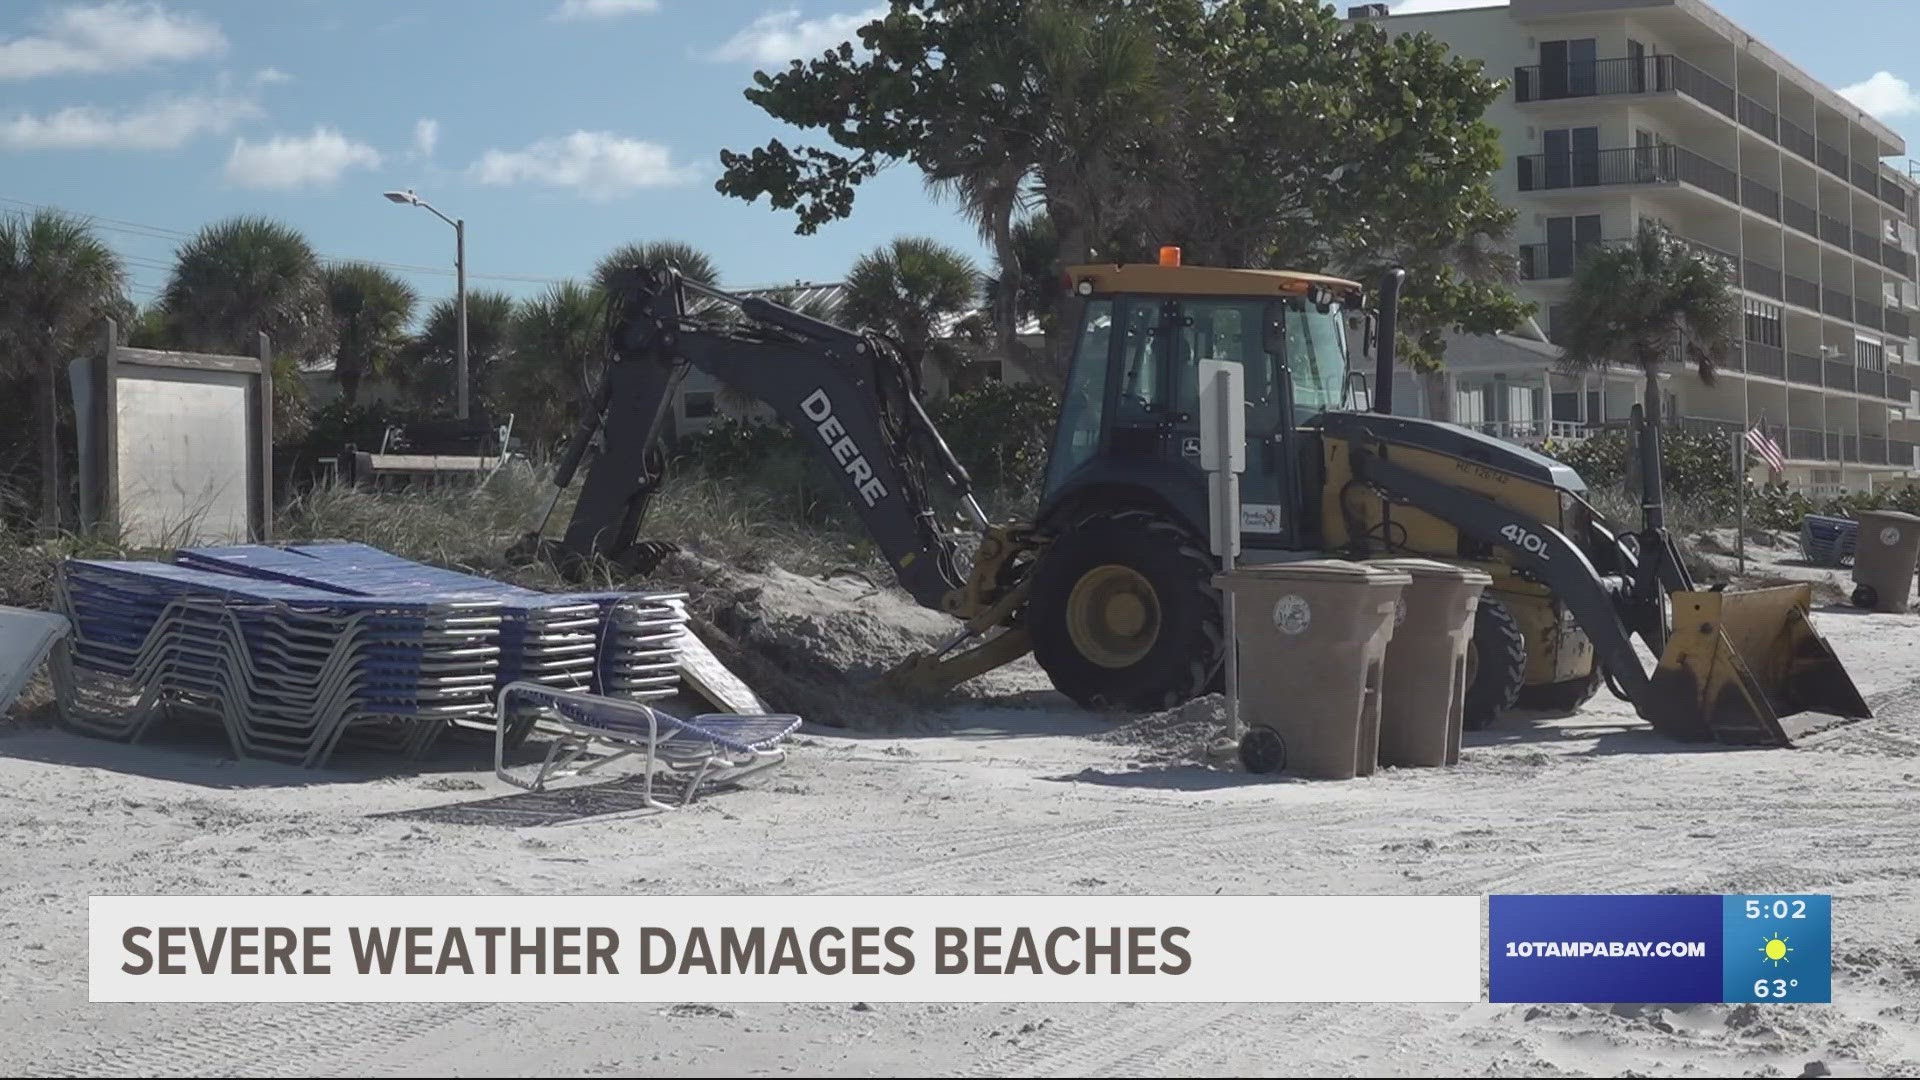 After Idalia devastated Pinellas County beaches, the end of hurricane season didn't mean the event of damaging weather to the coastline.